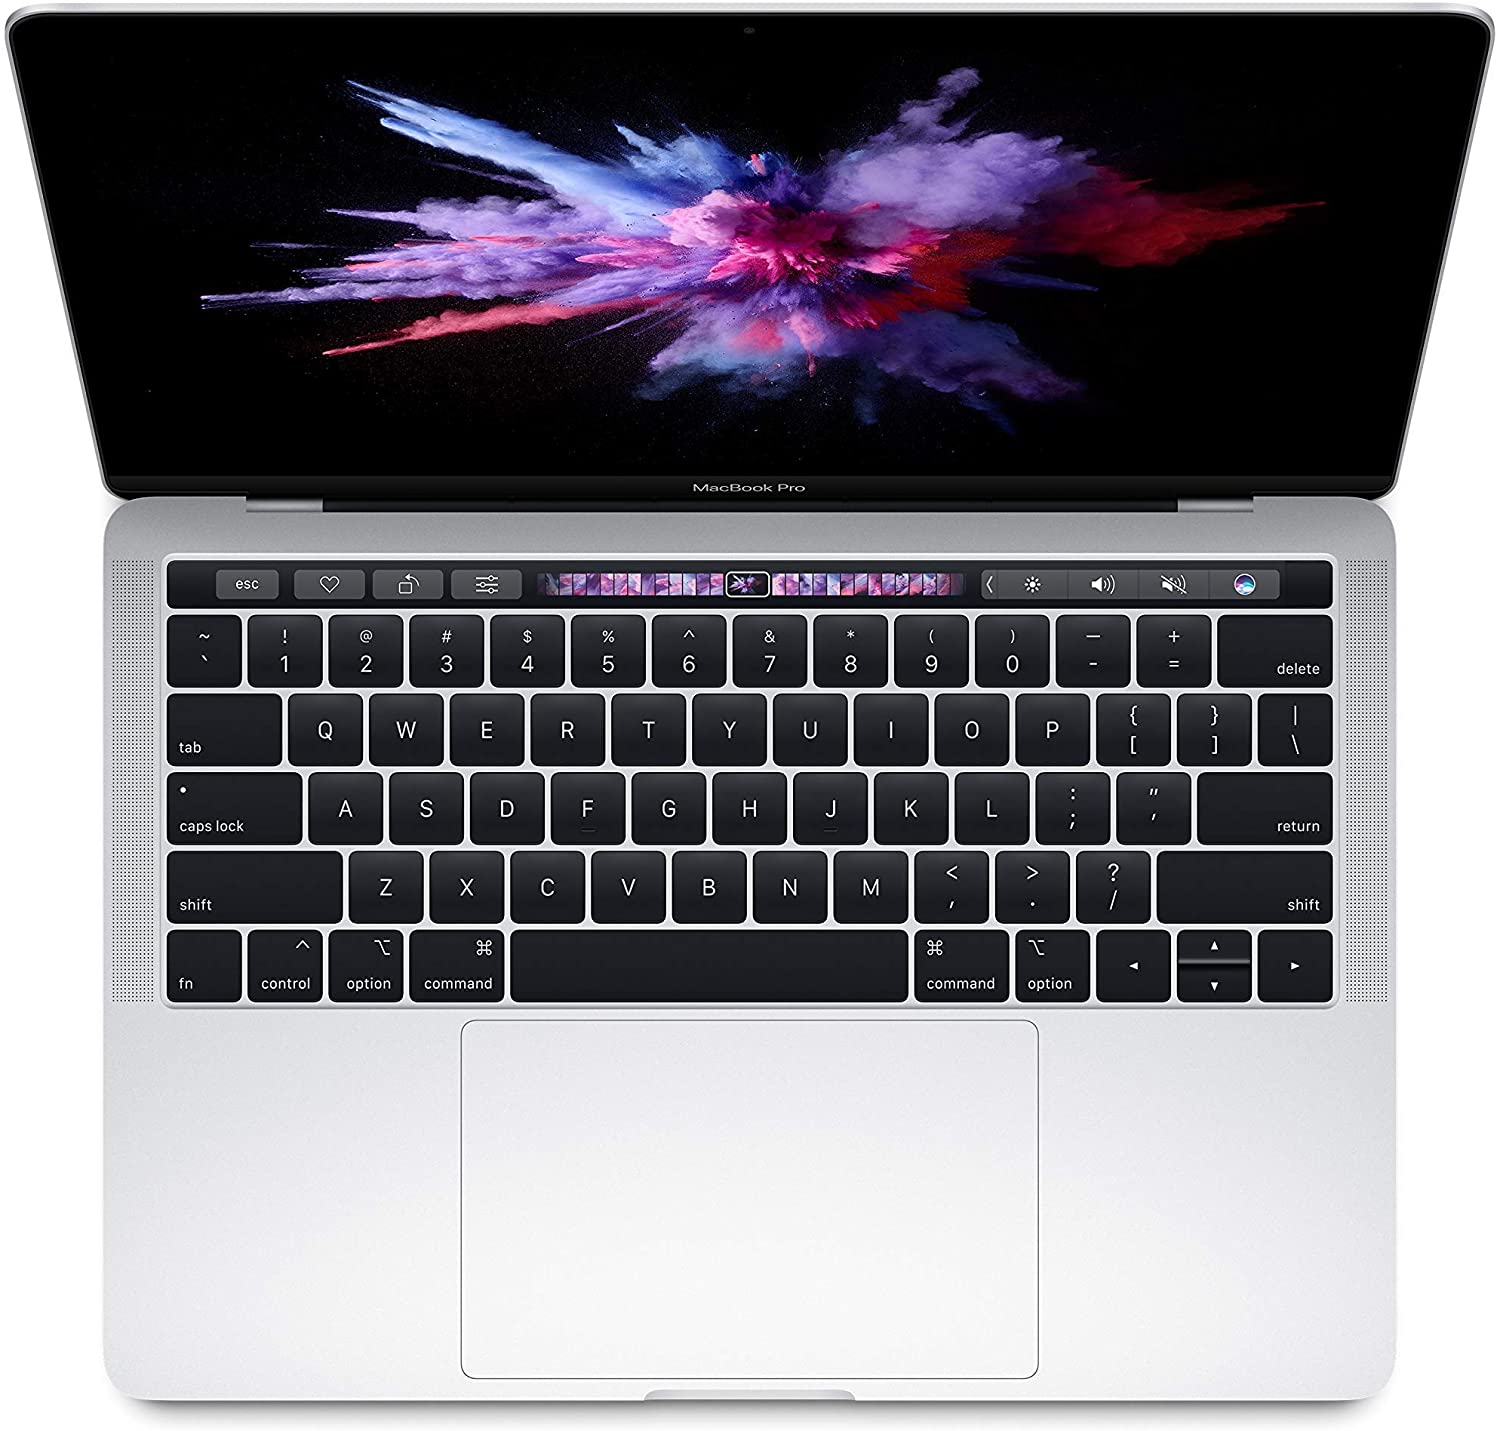 Restored Apple MacBook Pro MUHN2LL/A with 13.3" Intel Core i5 1.4GHz 8GB RAM Silver (Refurbished) - image 2 of 6